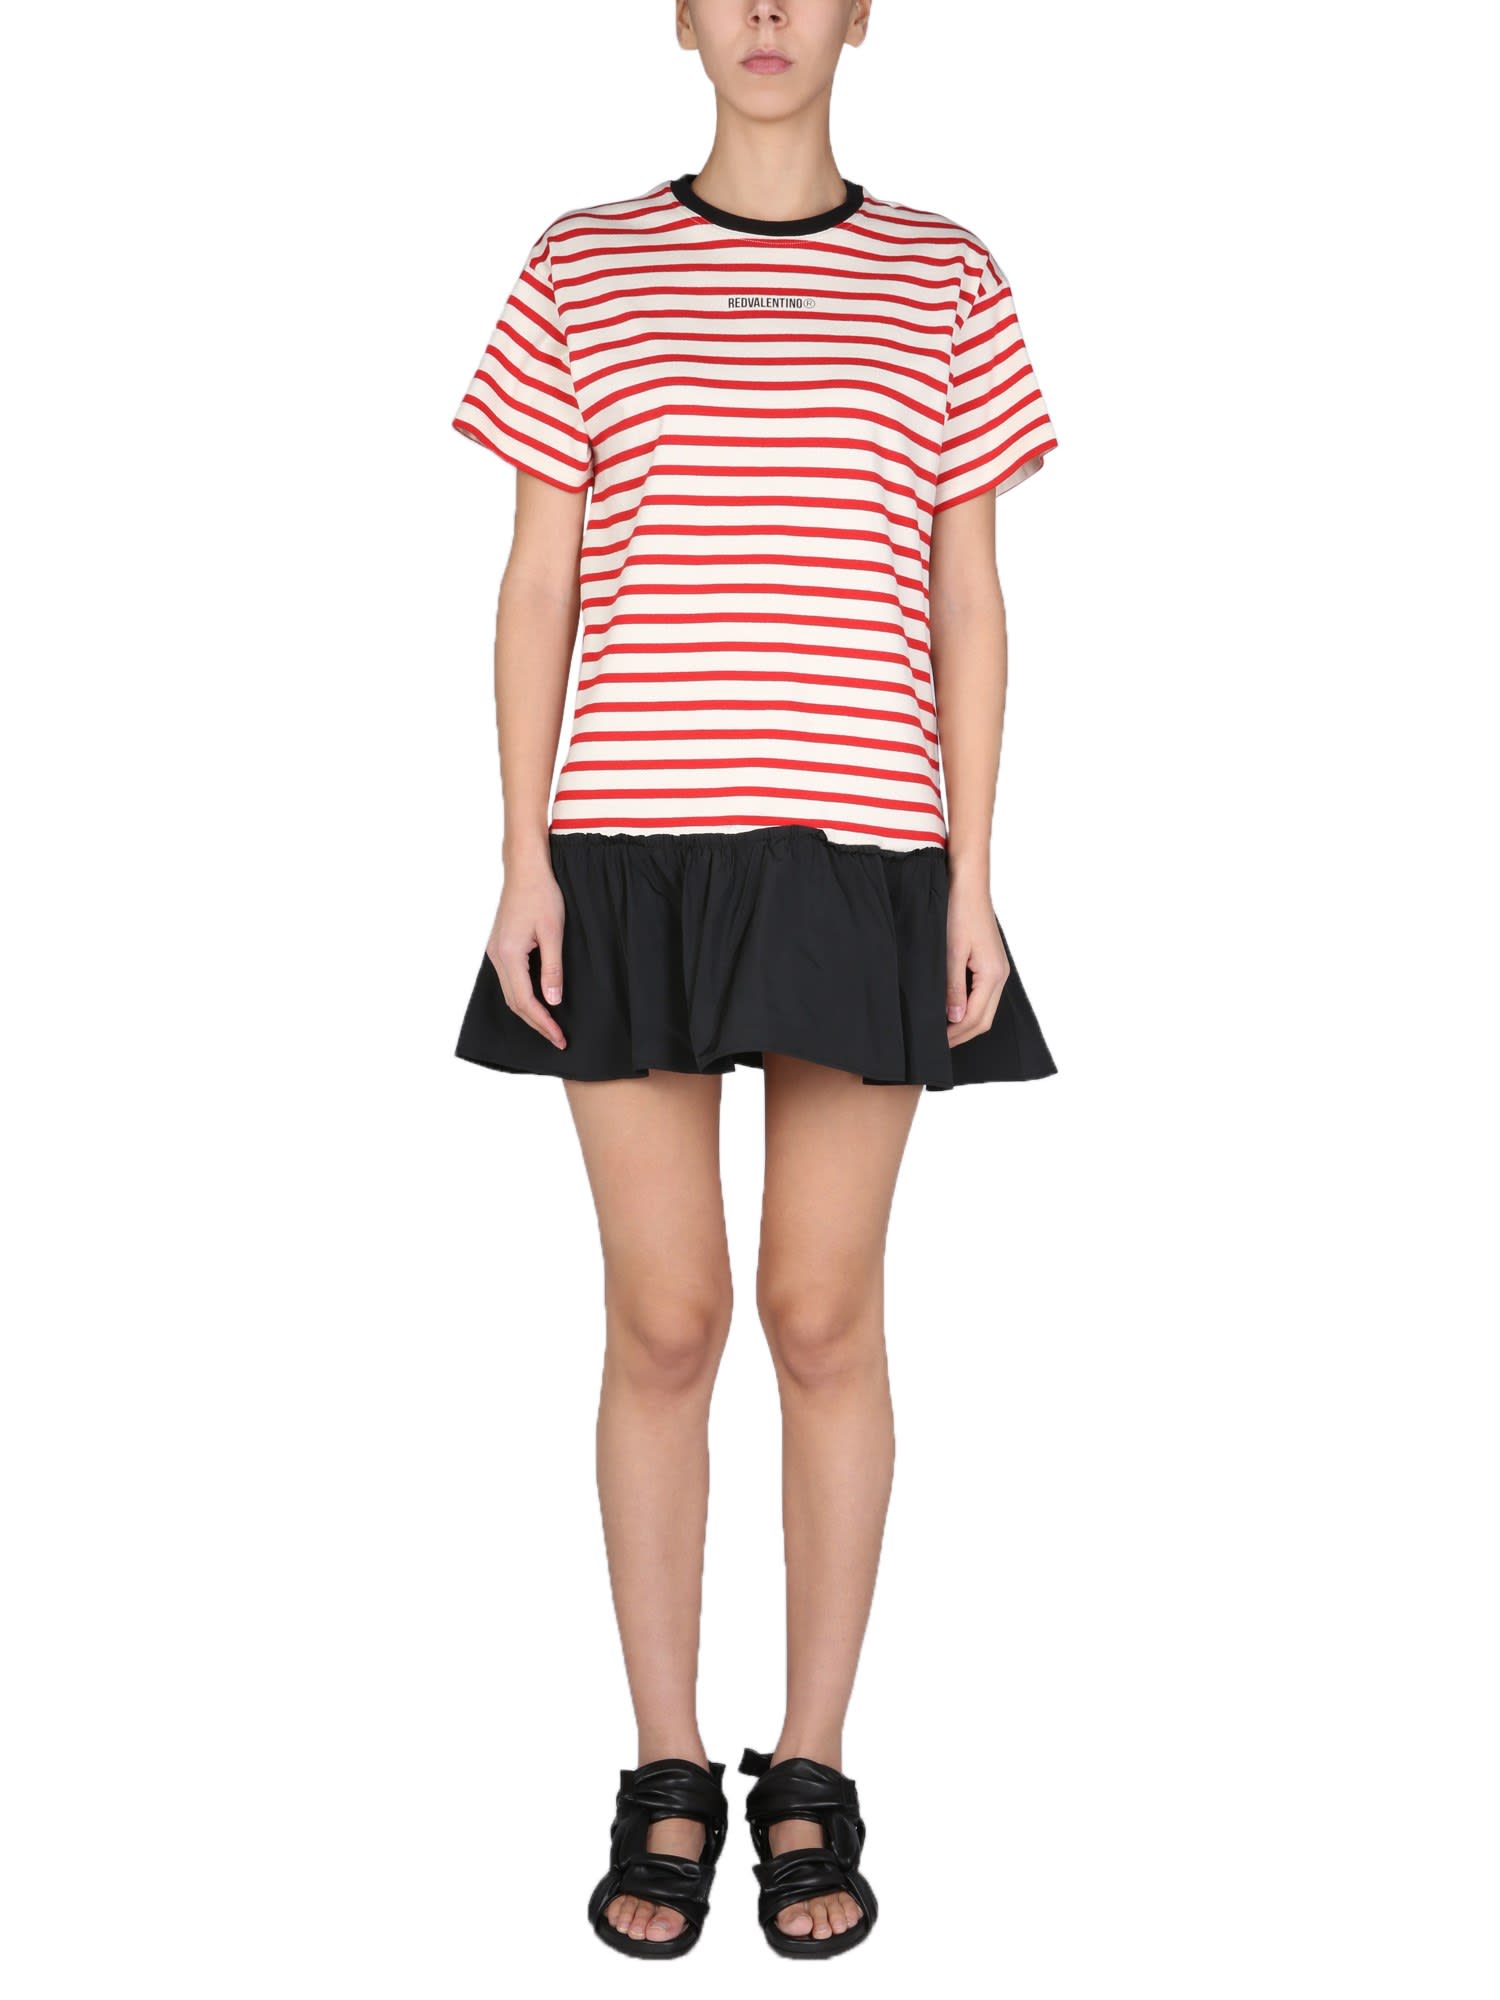 RED Valentino T-shirt Dress With Striped Pattern